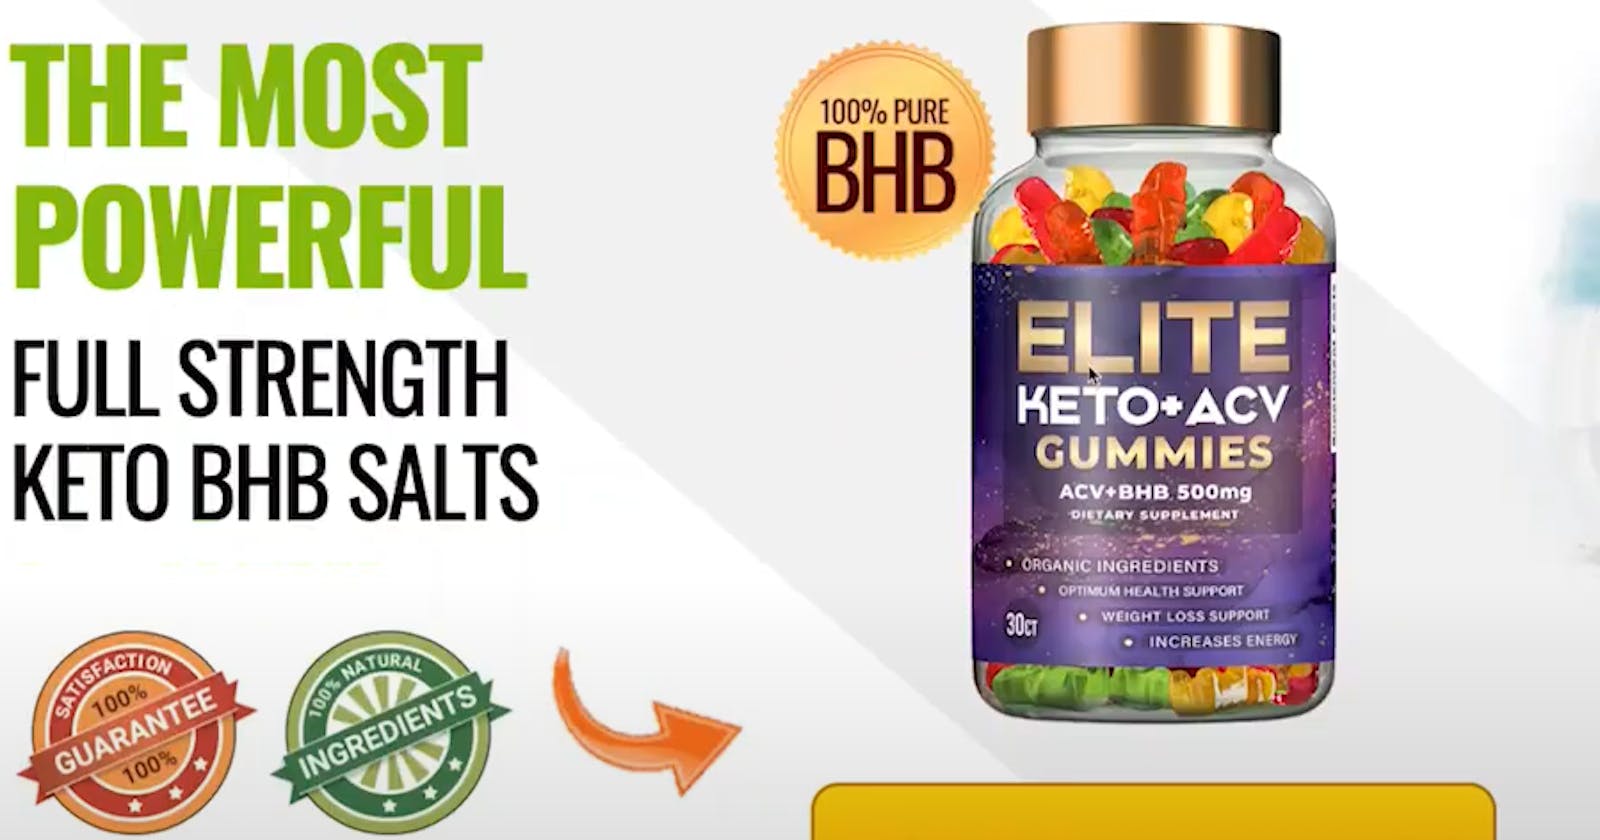 Elite Keto ACV Gummies: Reviews Safe Money Weight Loss Reviews, Price & Where To Buy?